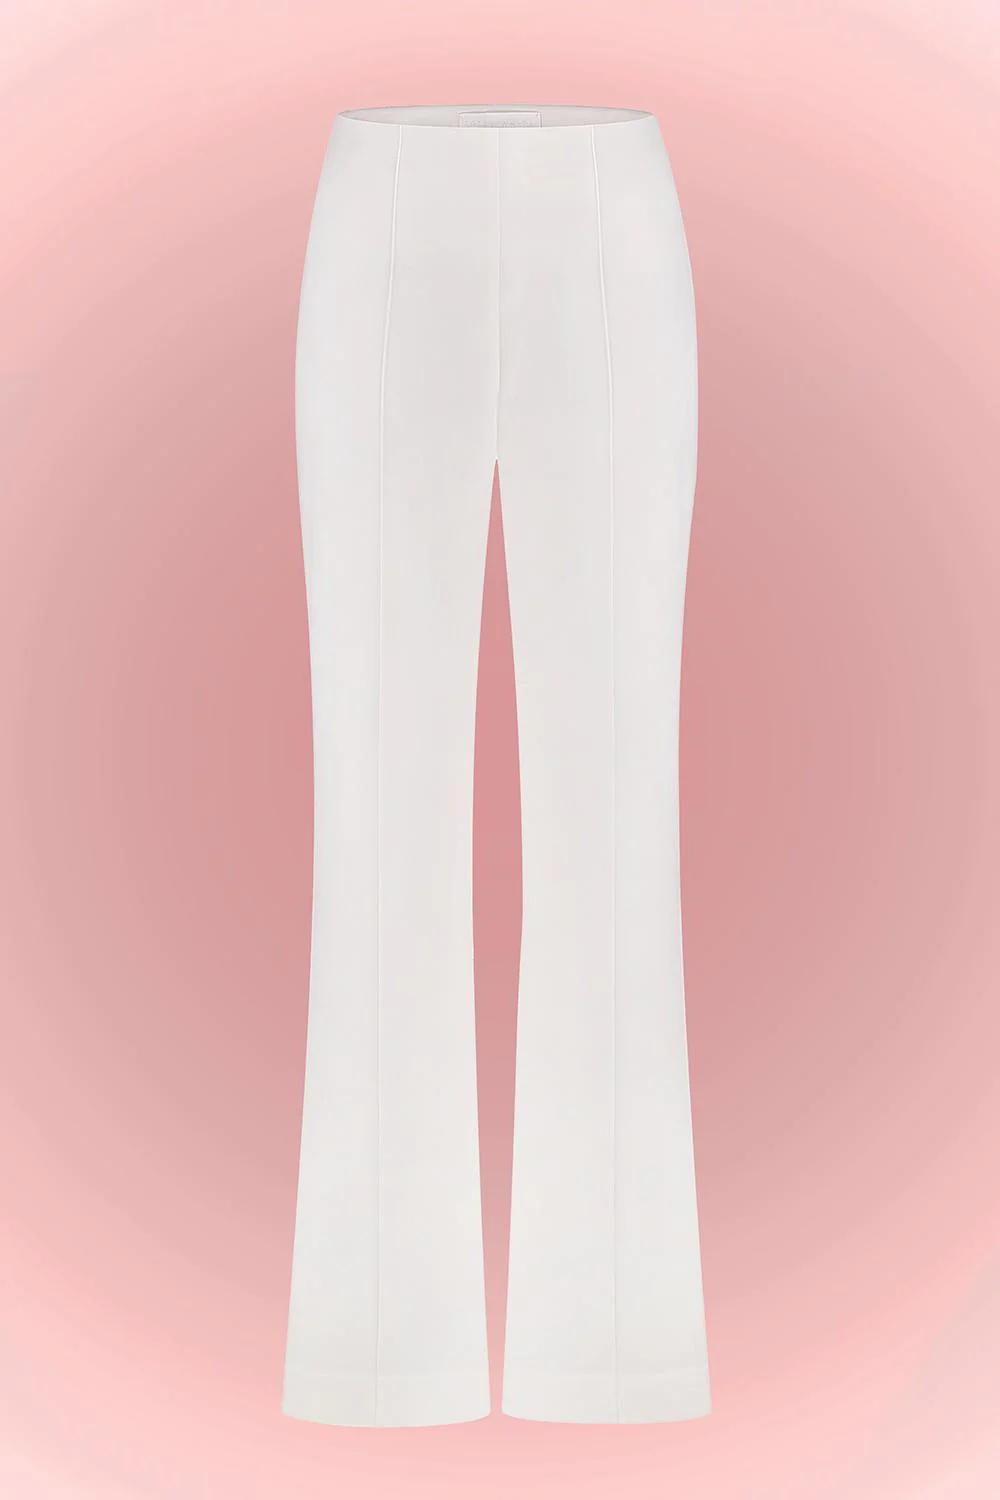 Flared Hem and Pleat Pants (Total White) SS2312